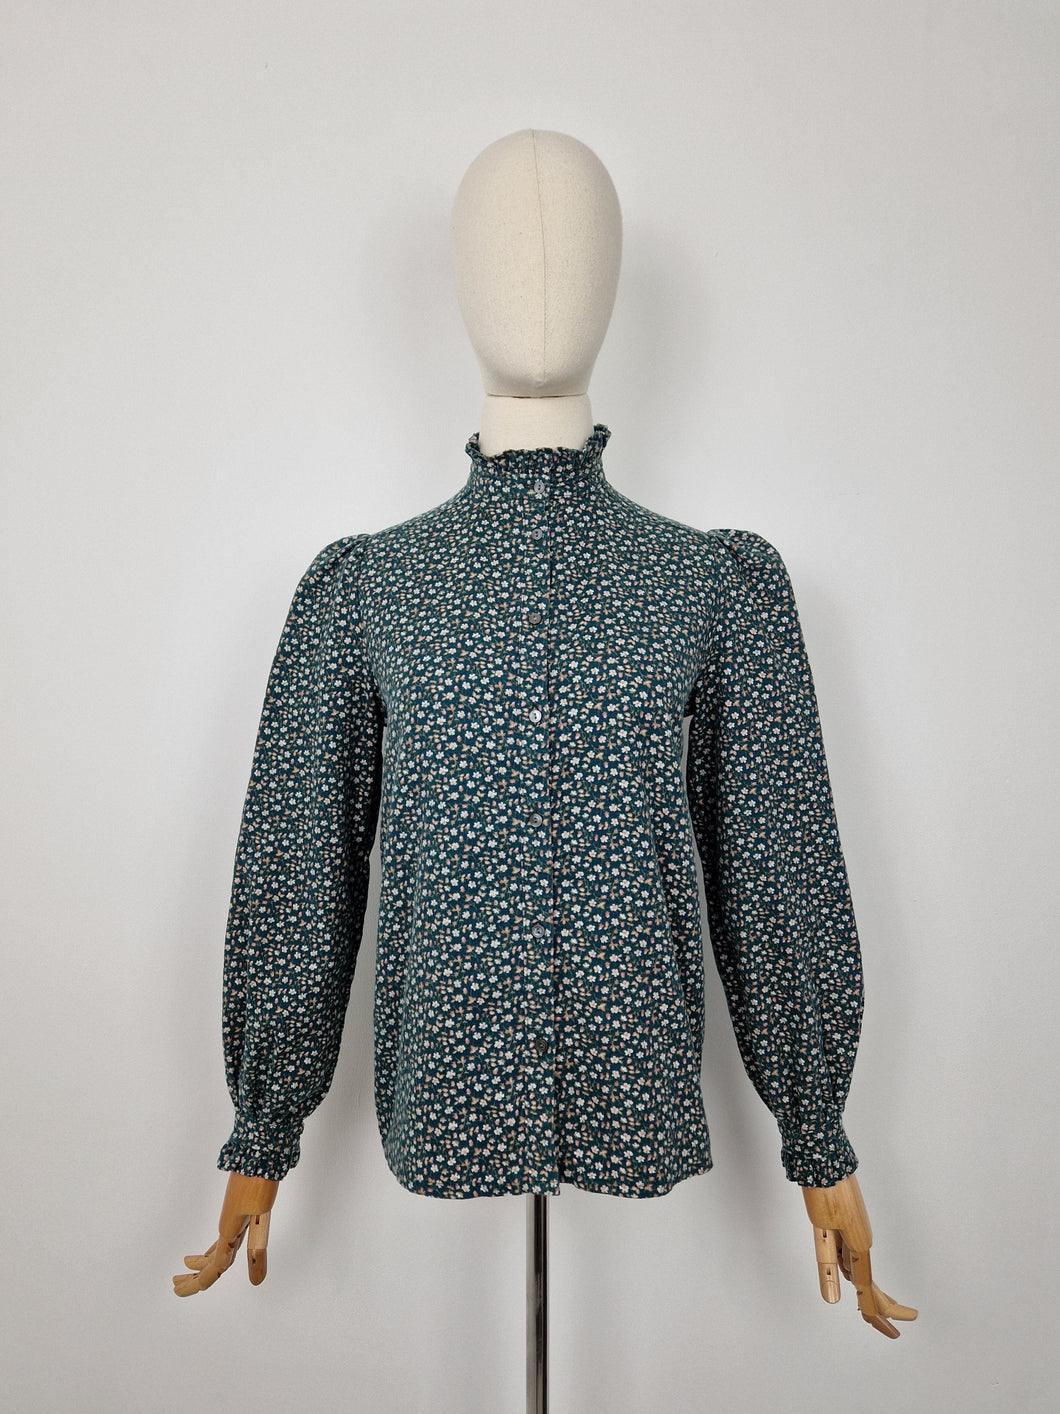 Vintage 70s Laura Ashley green ditsy blouse